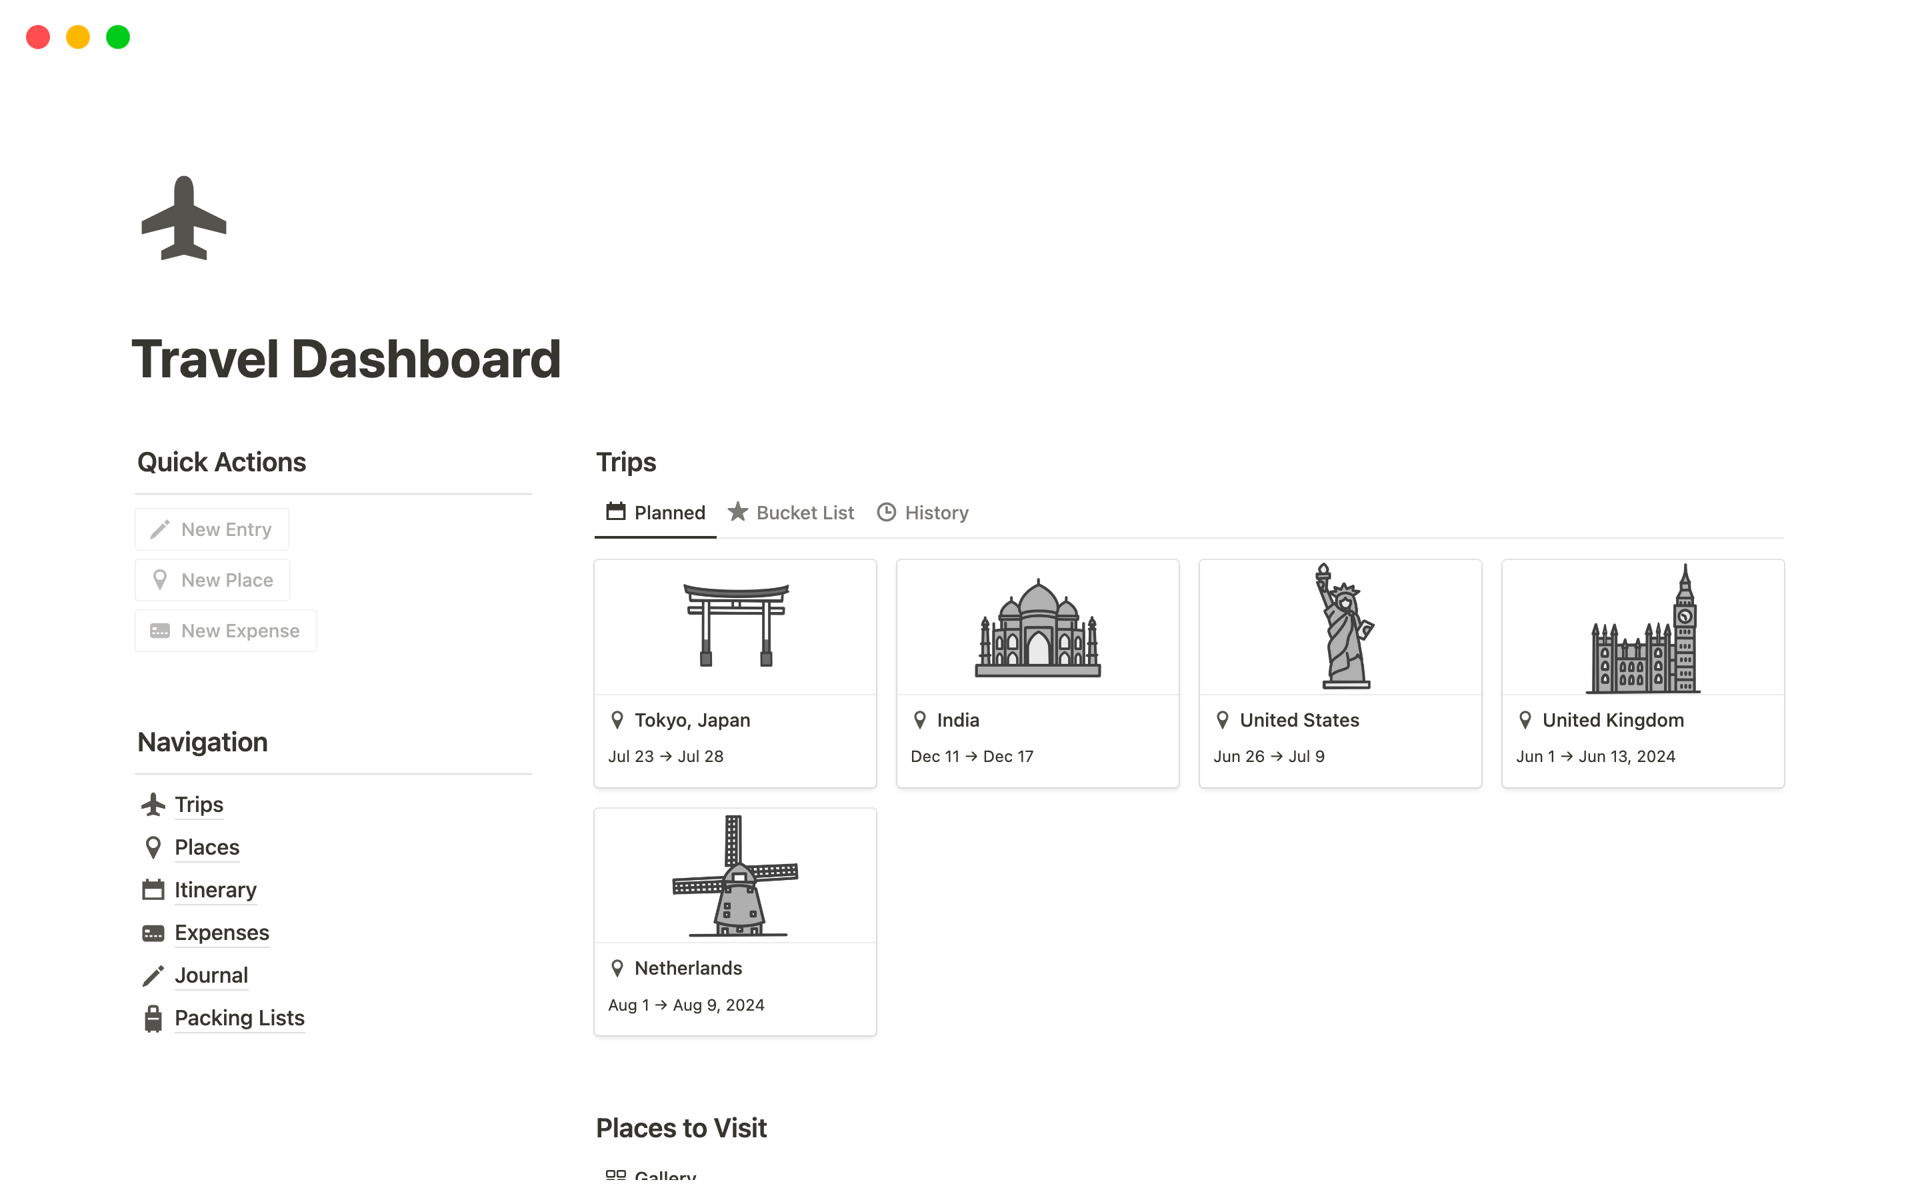 The all-in-one travel dashboard for frequent explorers.